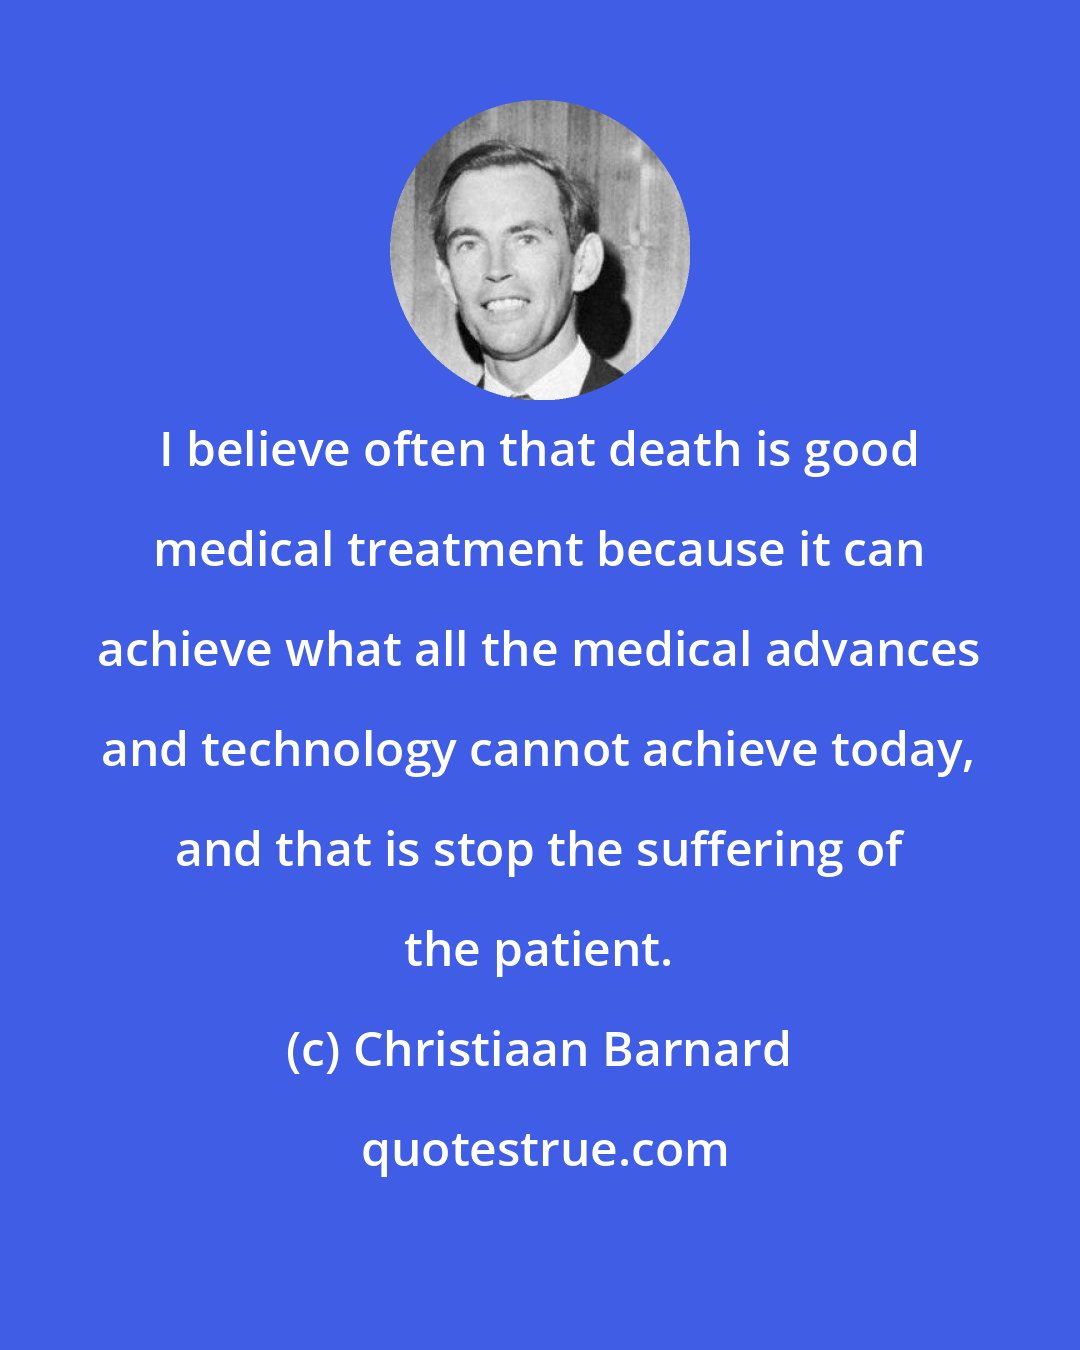 Christiaan Barnard: I believe often that death is good medical treatment because it can achieve what all the medical advances and technology cannot achieve today, and that is stop the suffering of the patient.